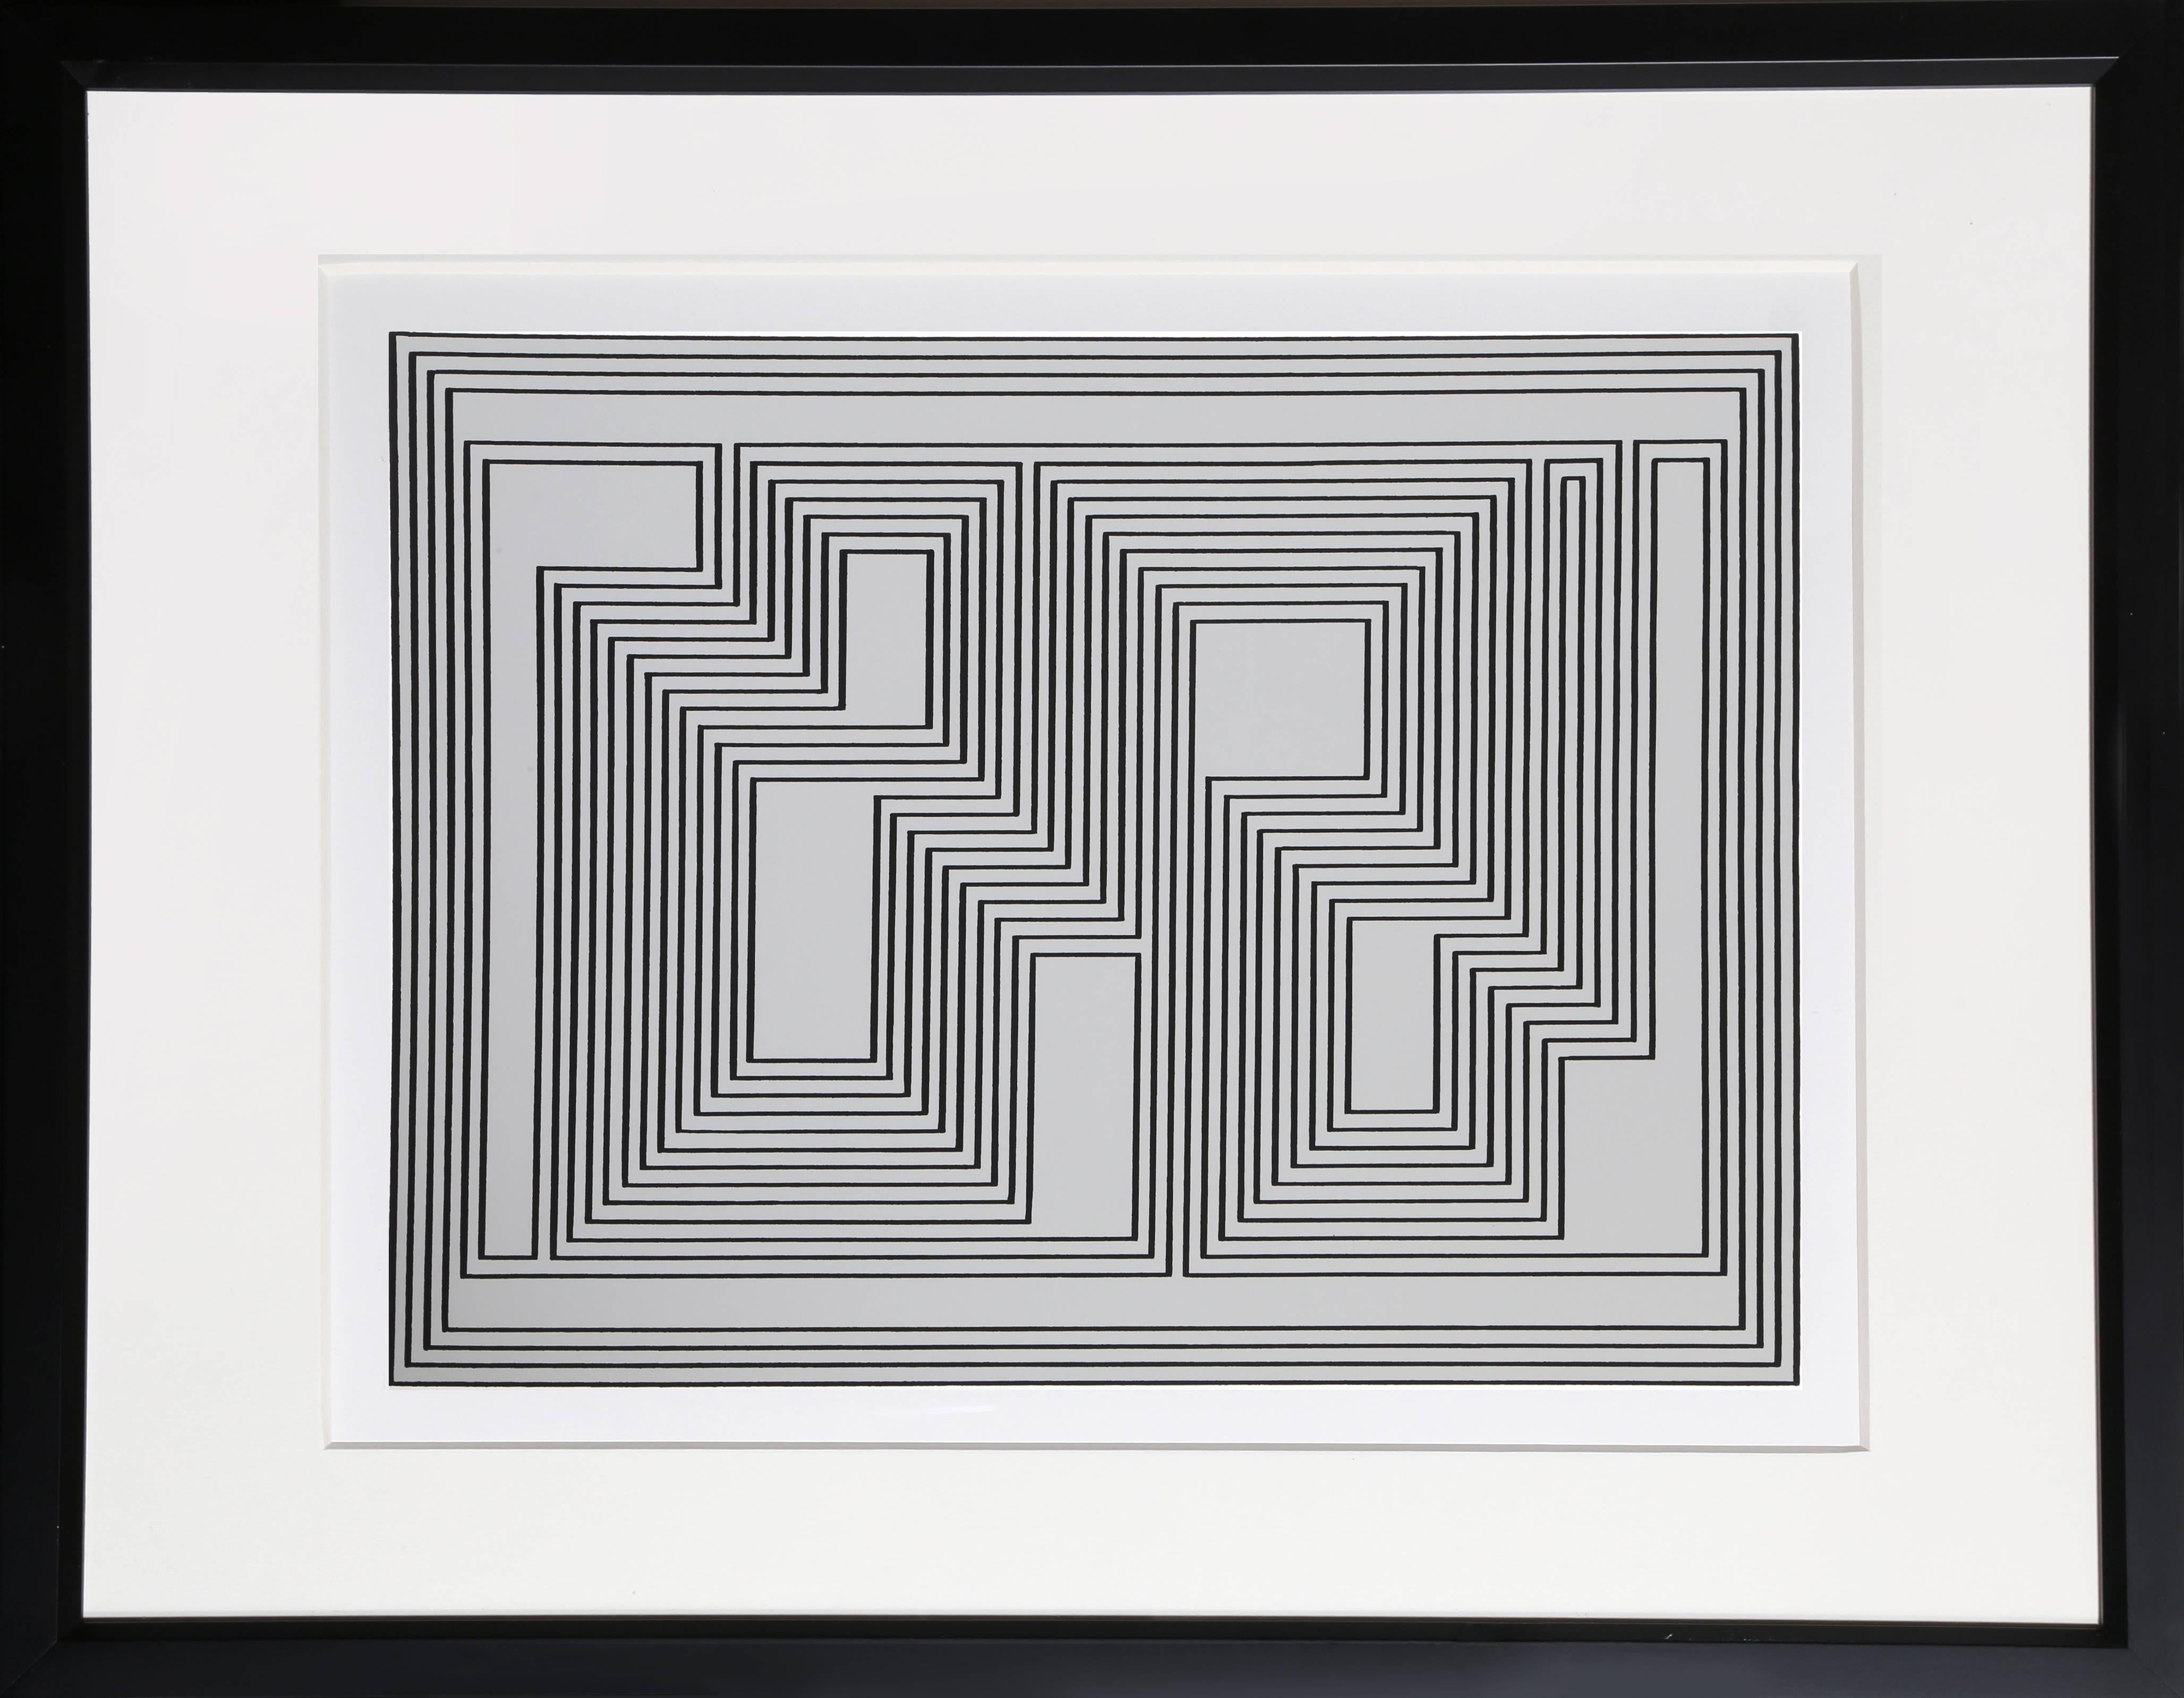 Josef Albers Abstract Print - untitled from Formulation: Articulation